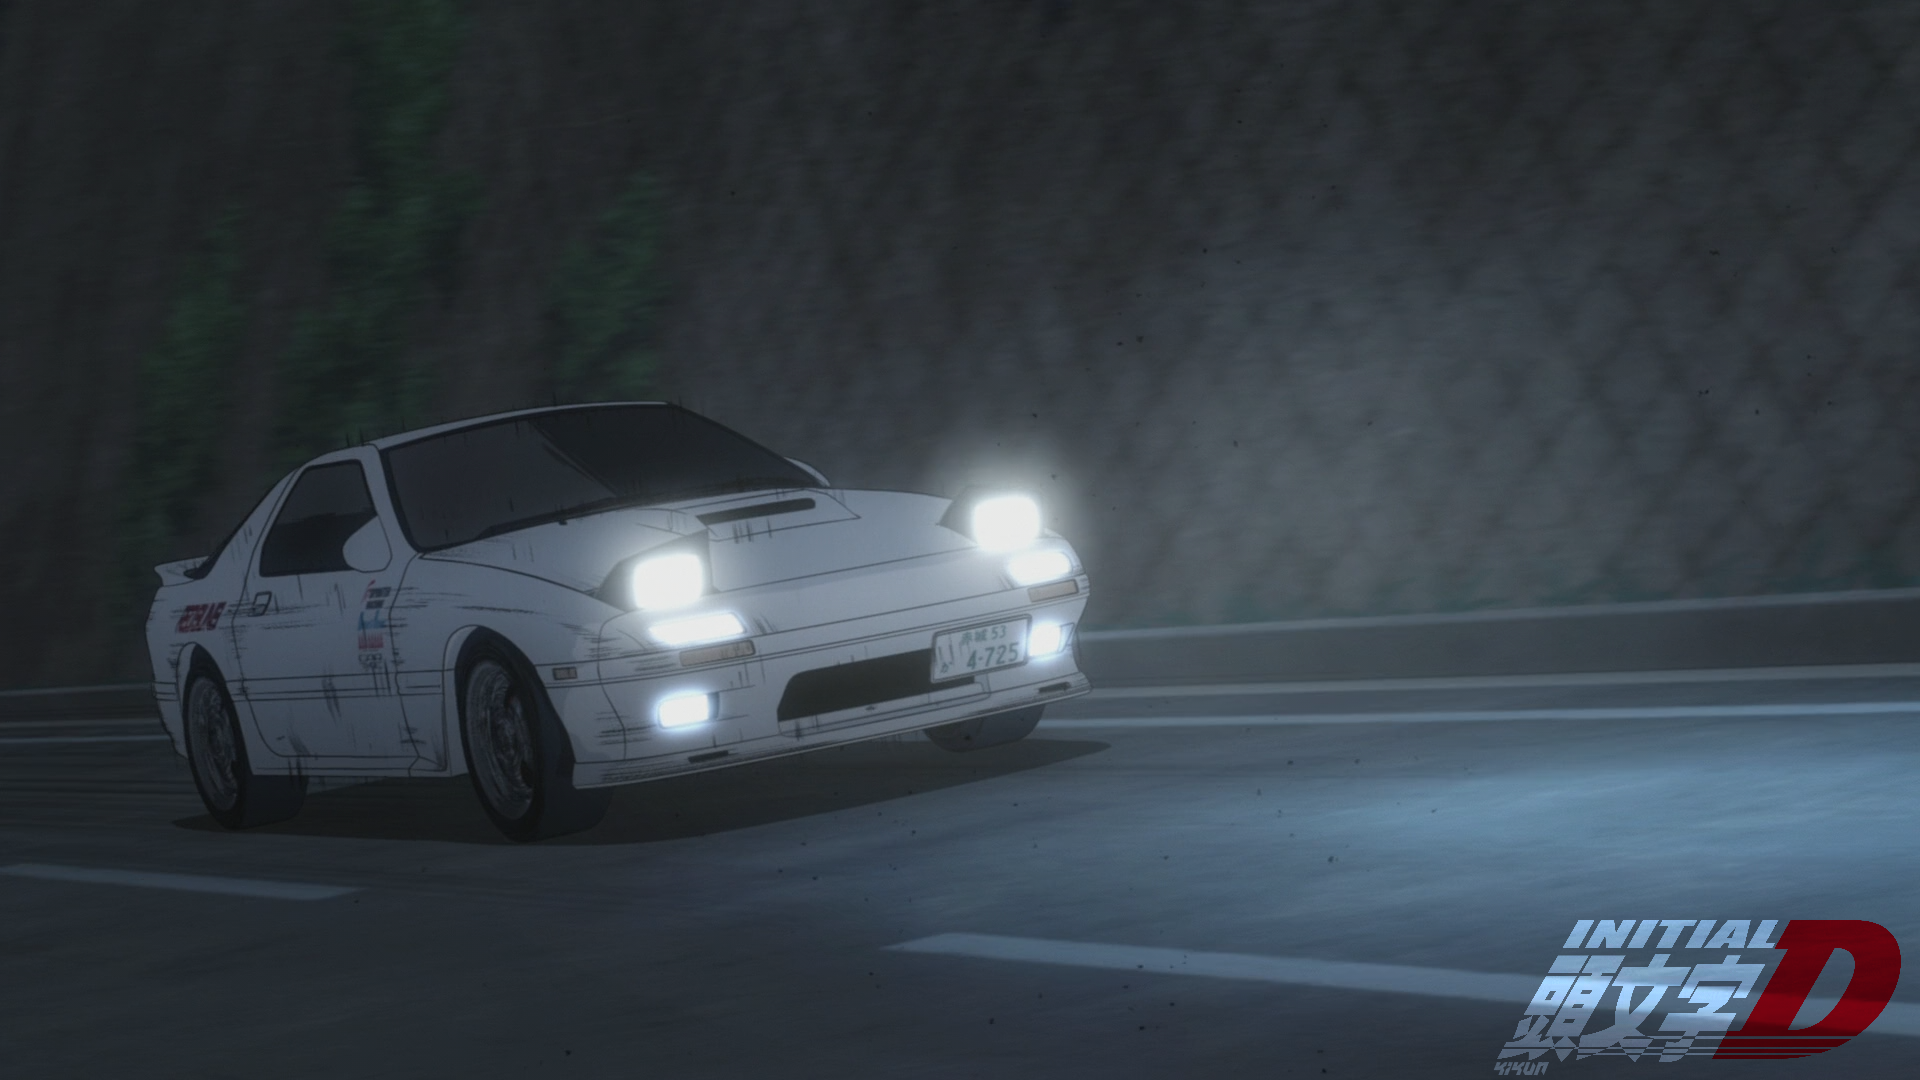 Initial D Wallpaper Collection Part